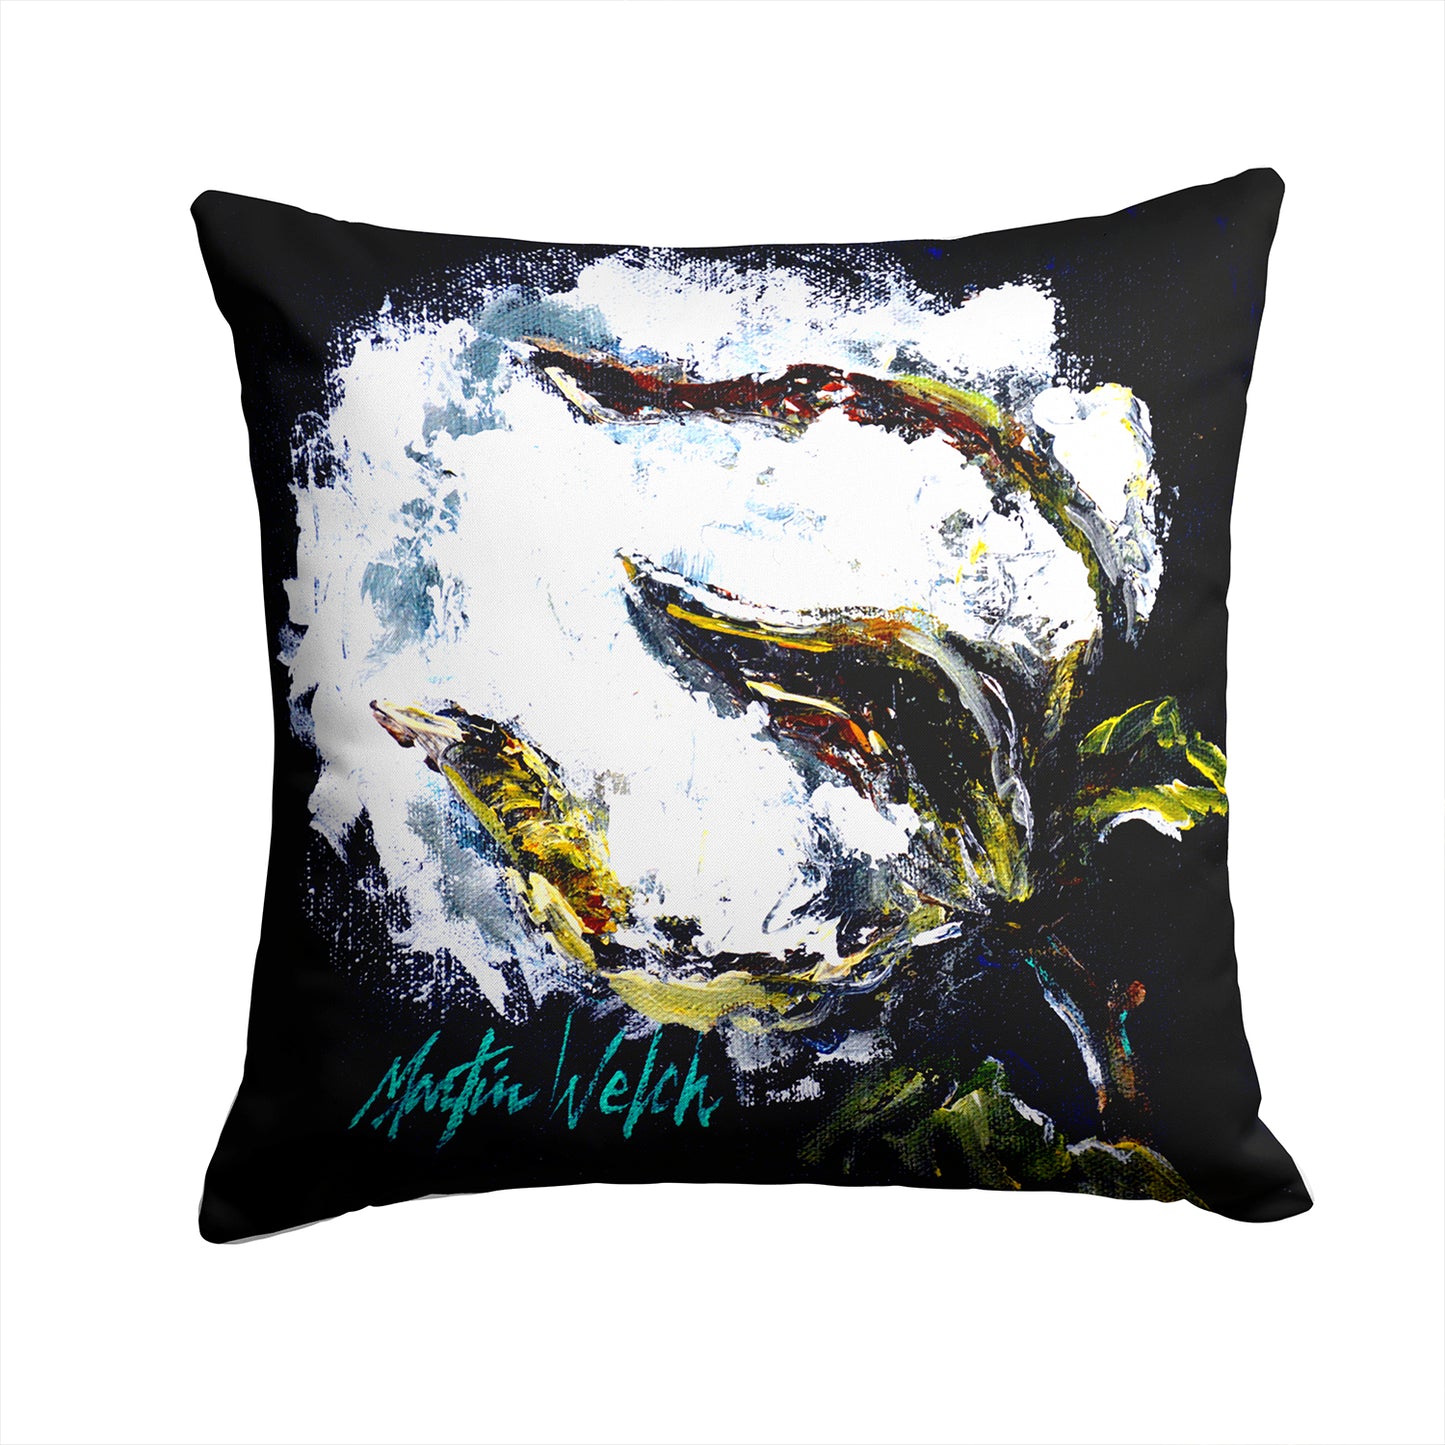 Buy this That Boll Cotton Fabric Decorative Pillow